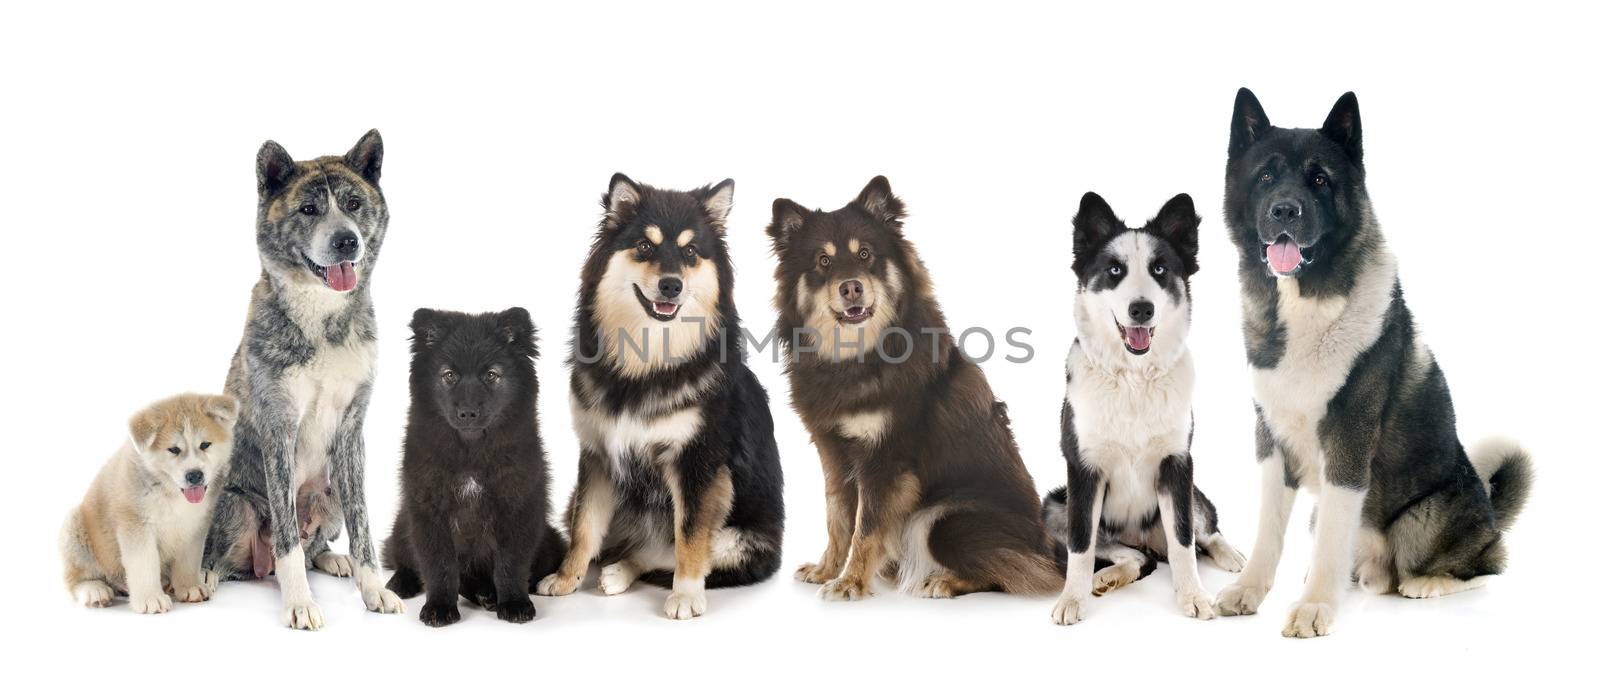 primitive dogs in front of white background